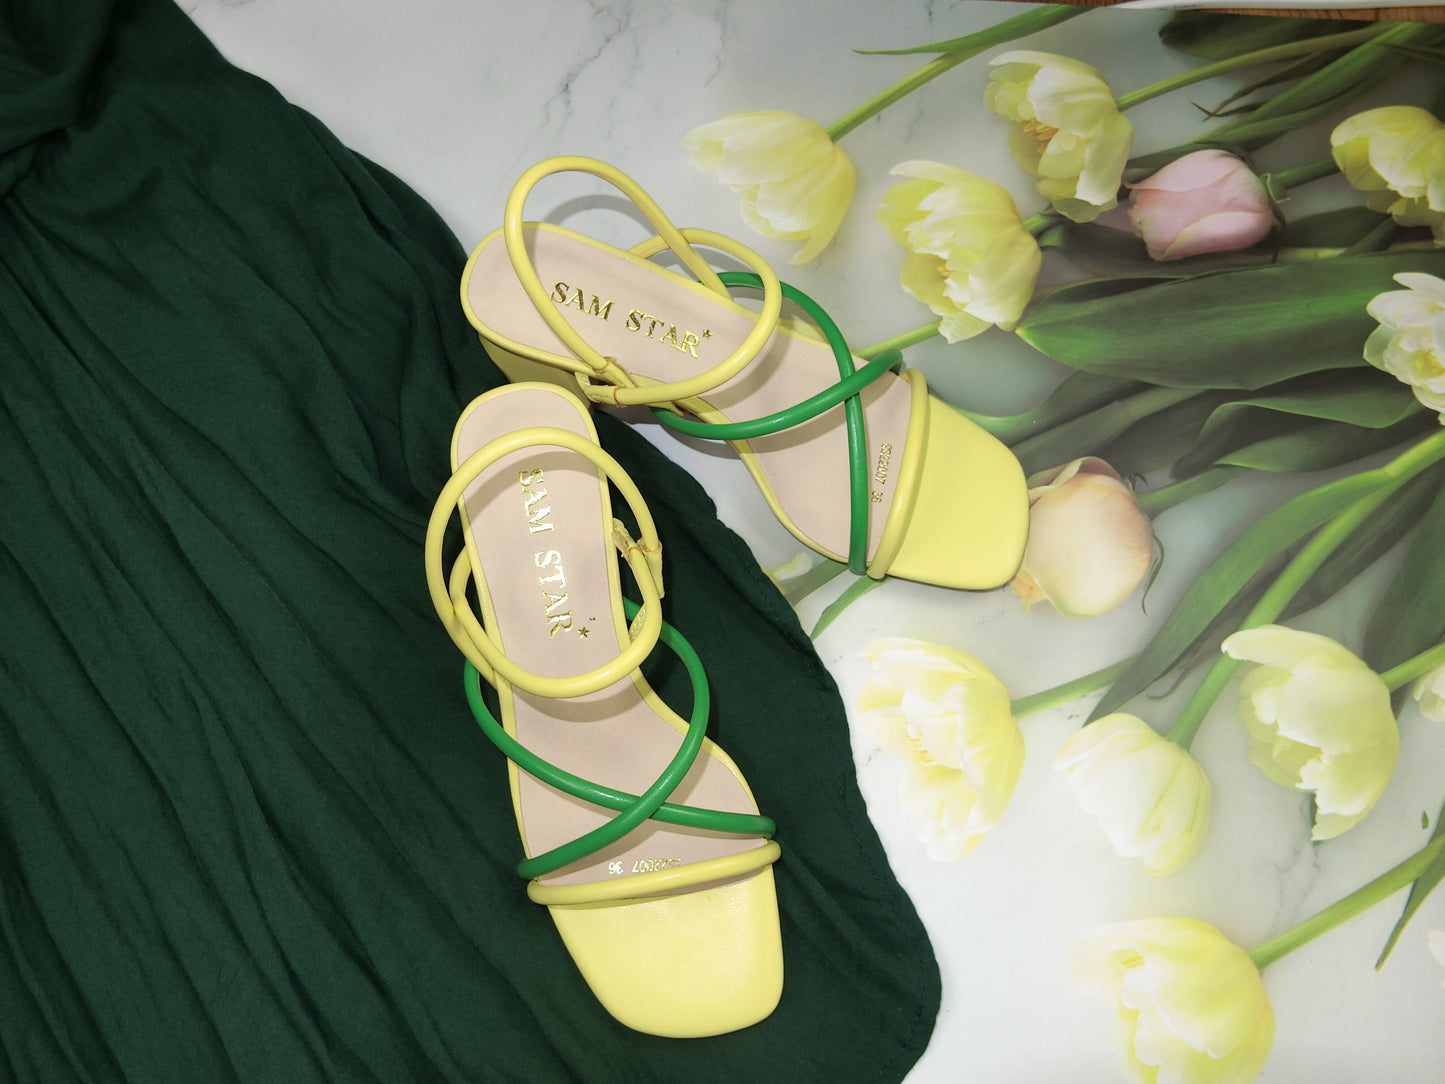 SS22008 Genuine leather strappy block heel sandals in Green and Yellow sandals Sam Star Shoes Green/Yellow 36/3 